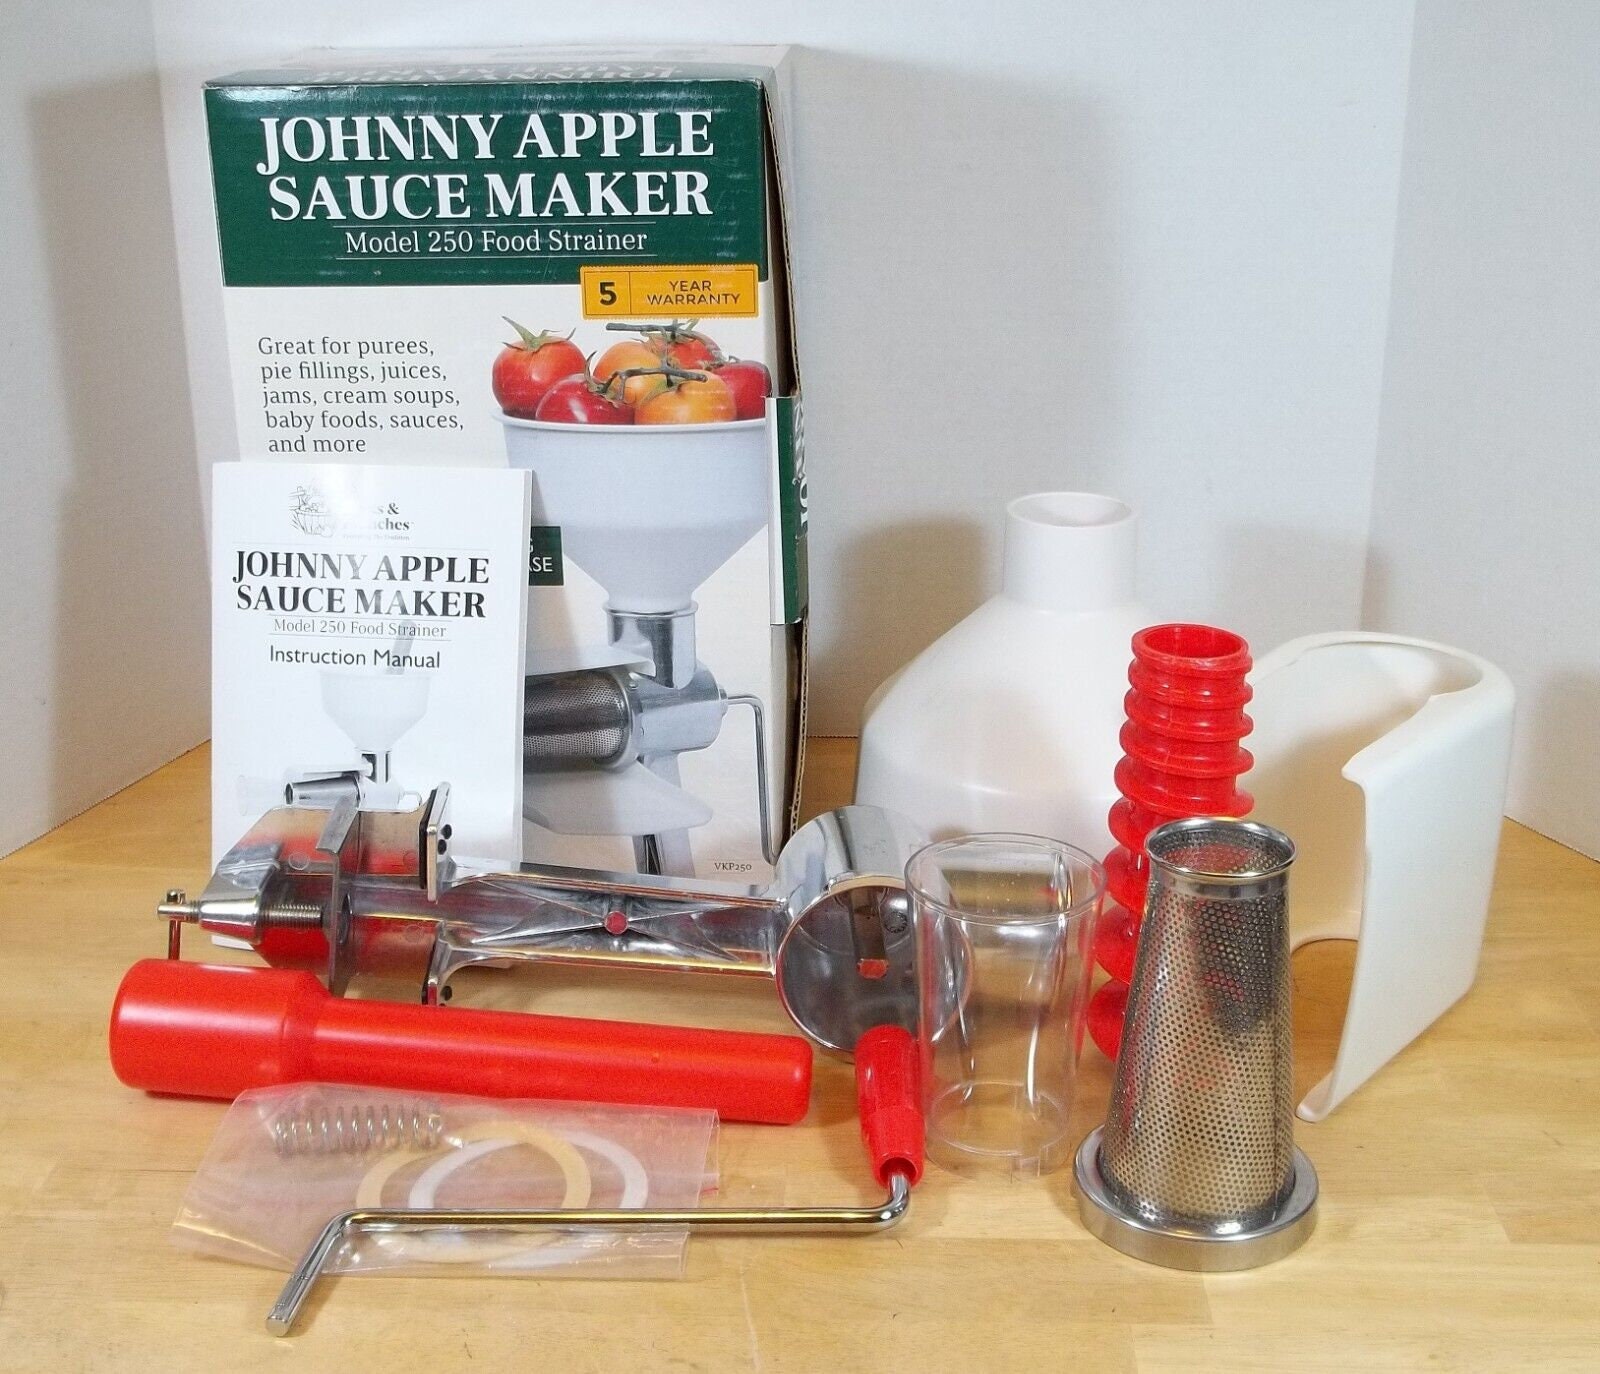 Johnny Apple Sauce Maker, Model 250 Food Strainer, With Box and Manual 